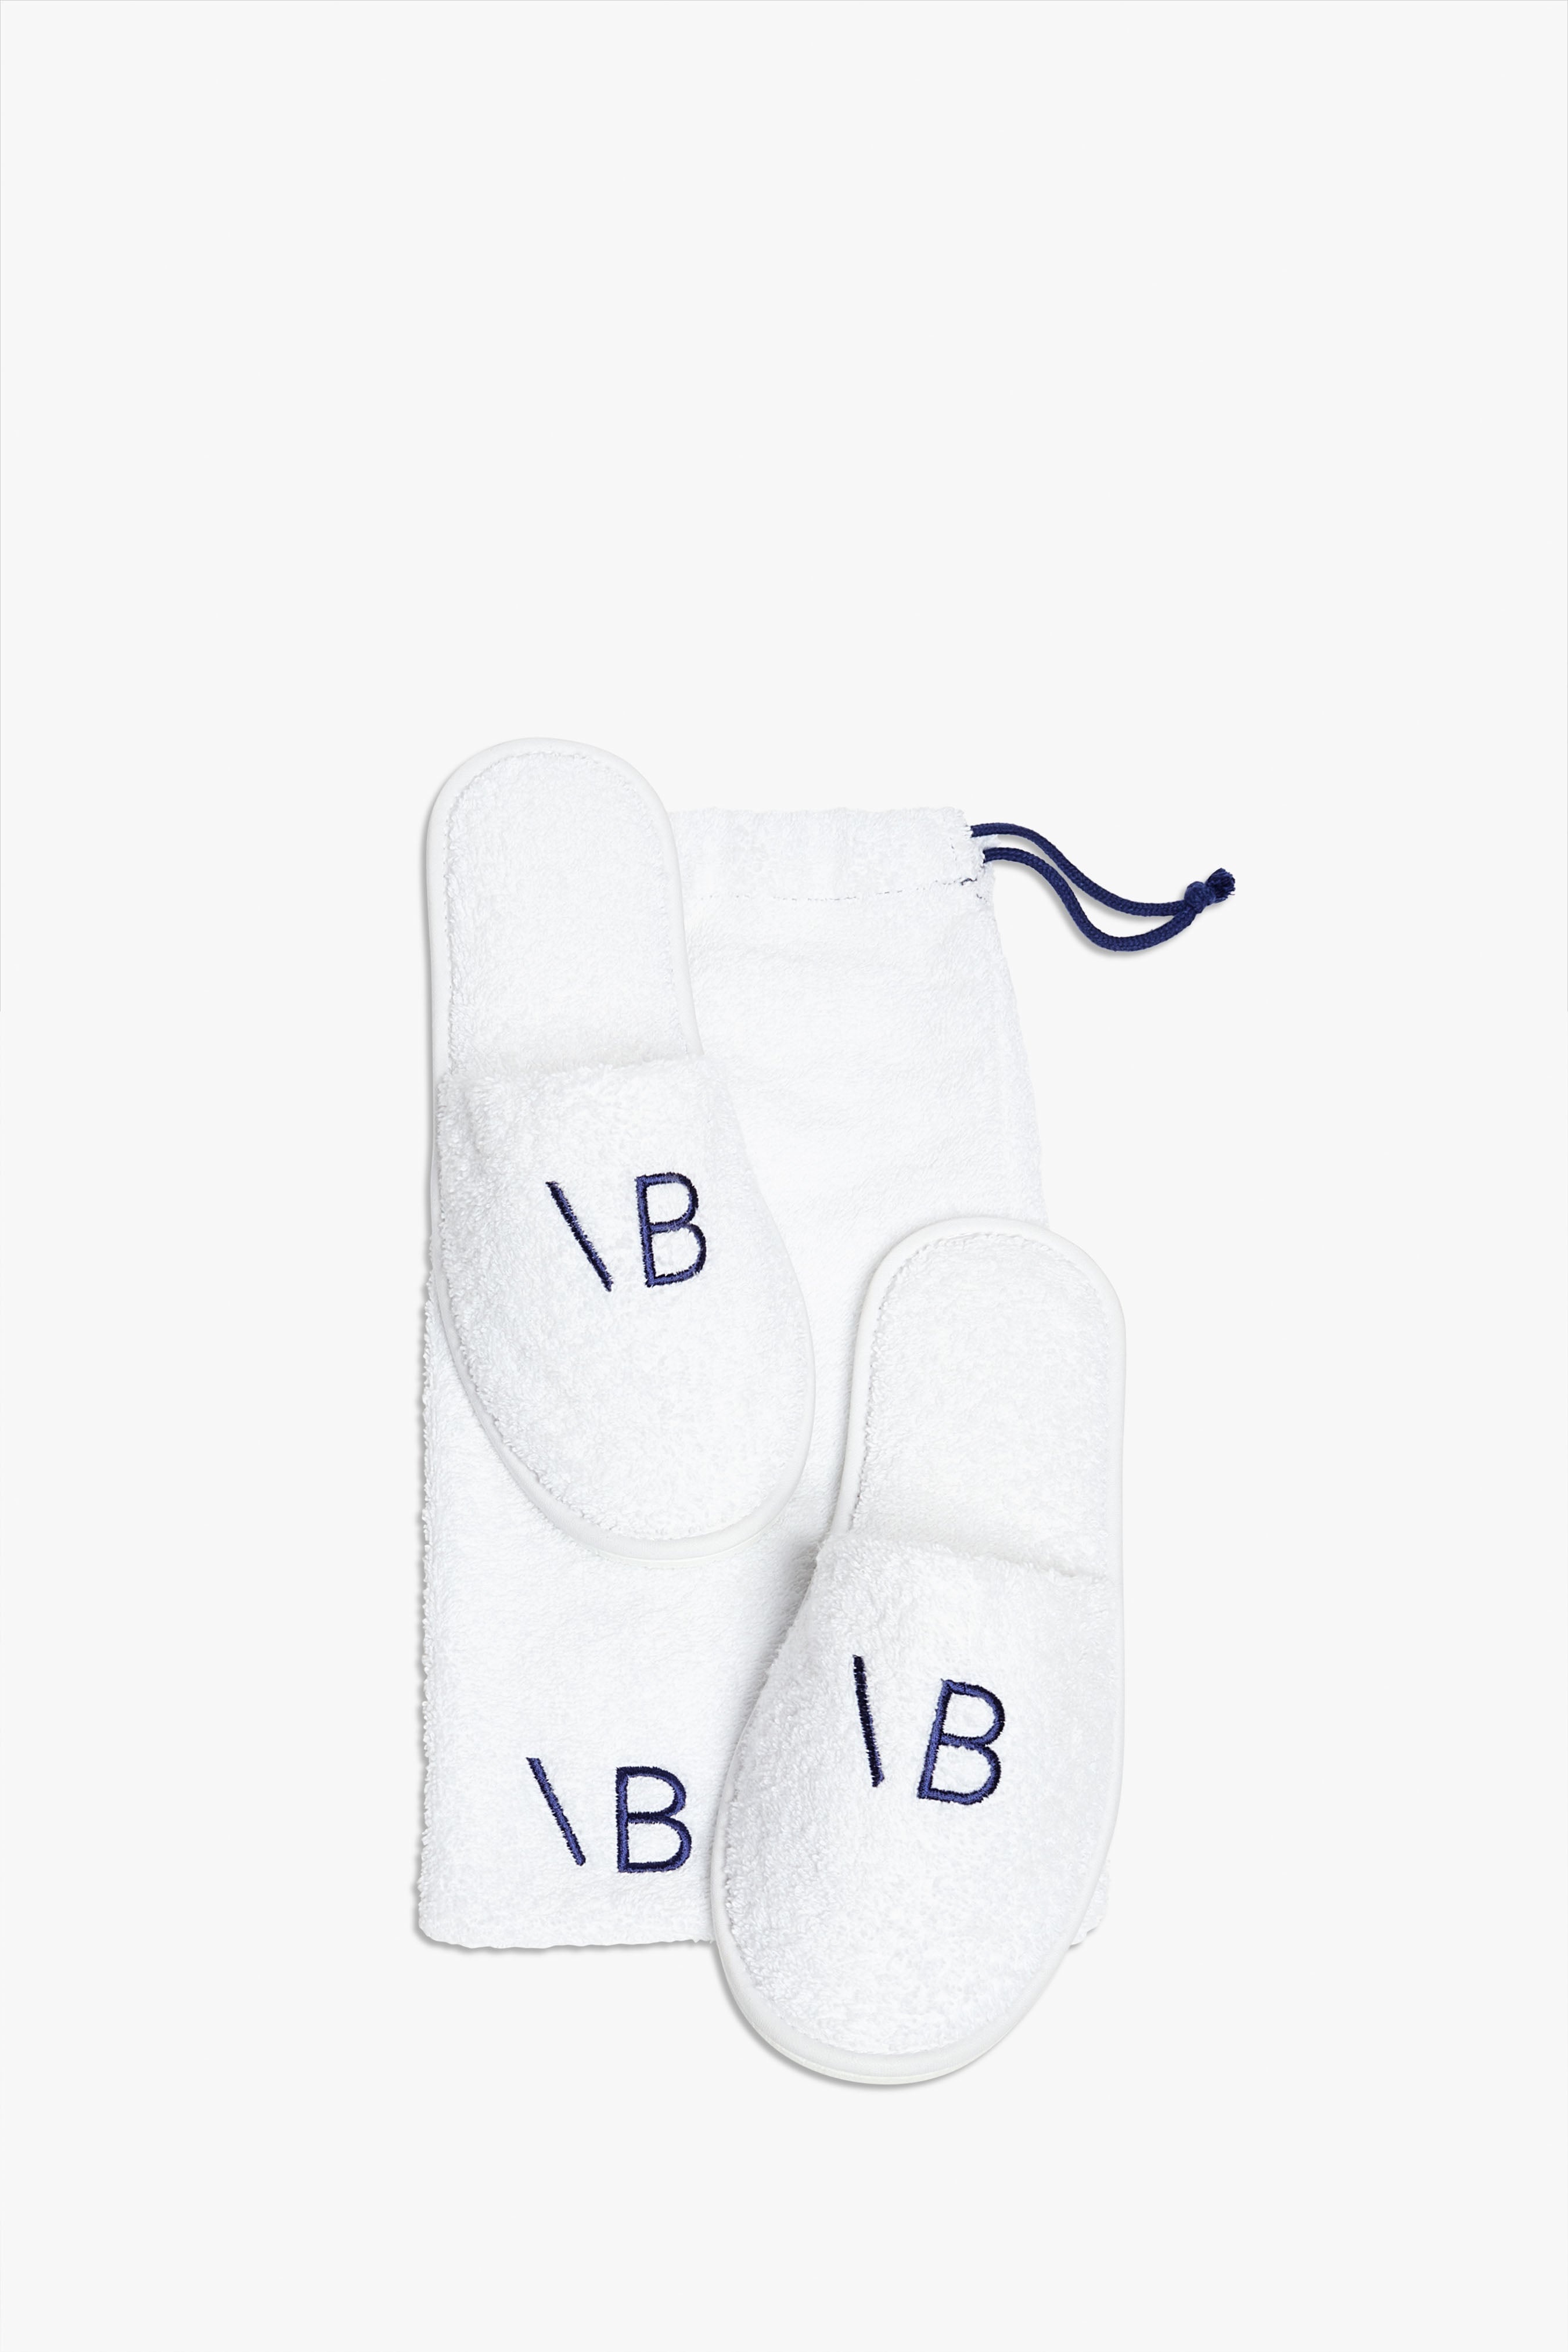 VB Embroidered Slippers in Navy-White - 1